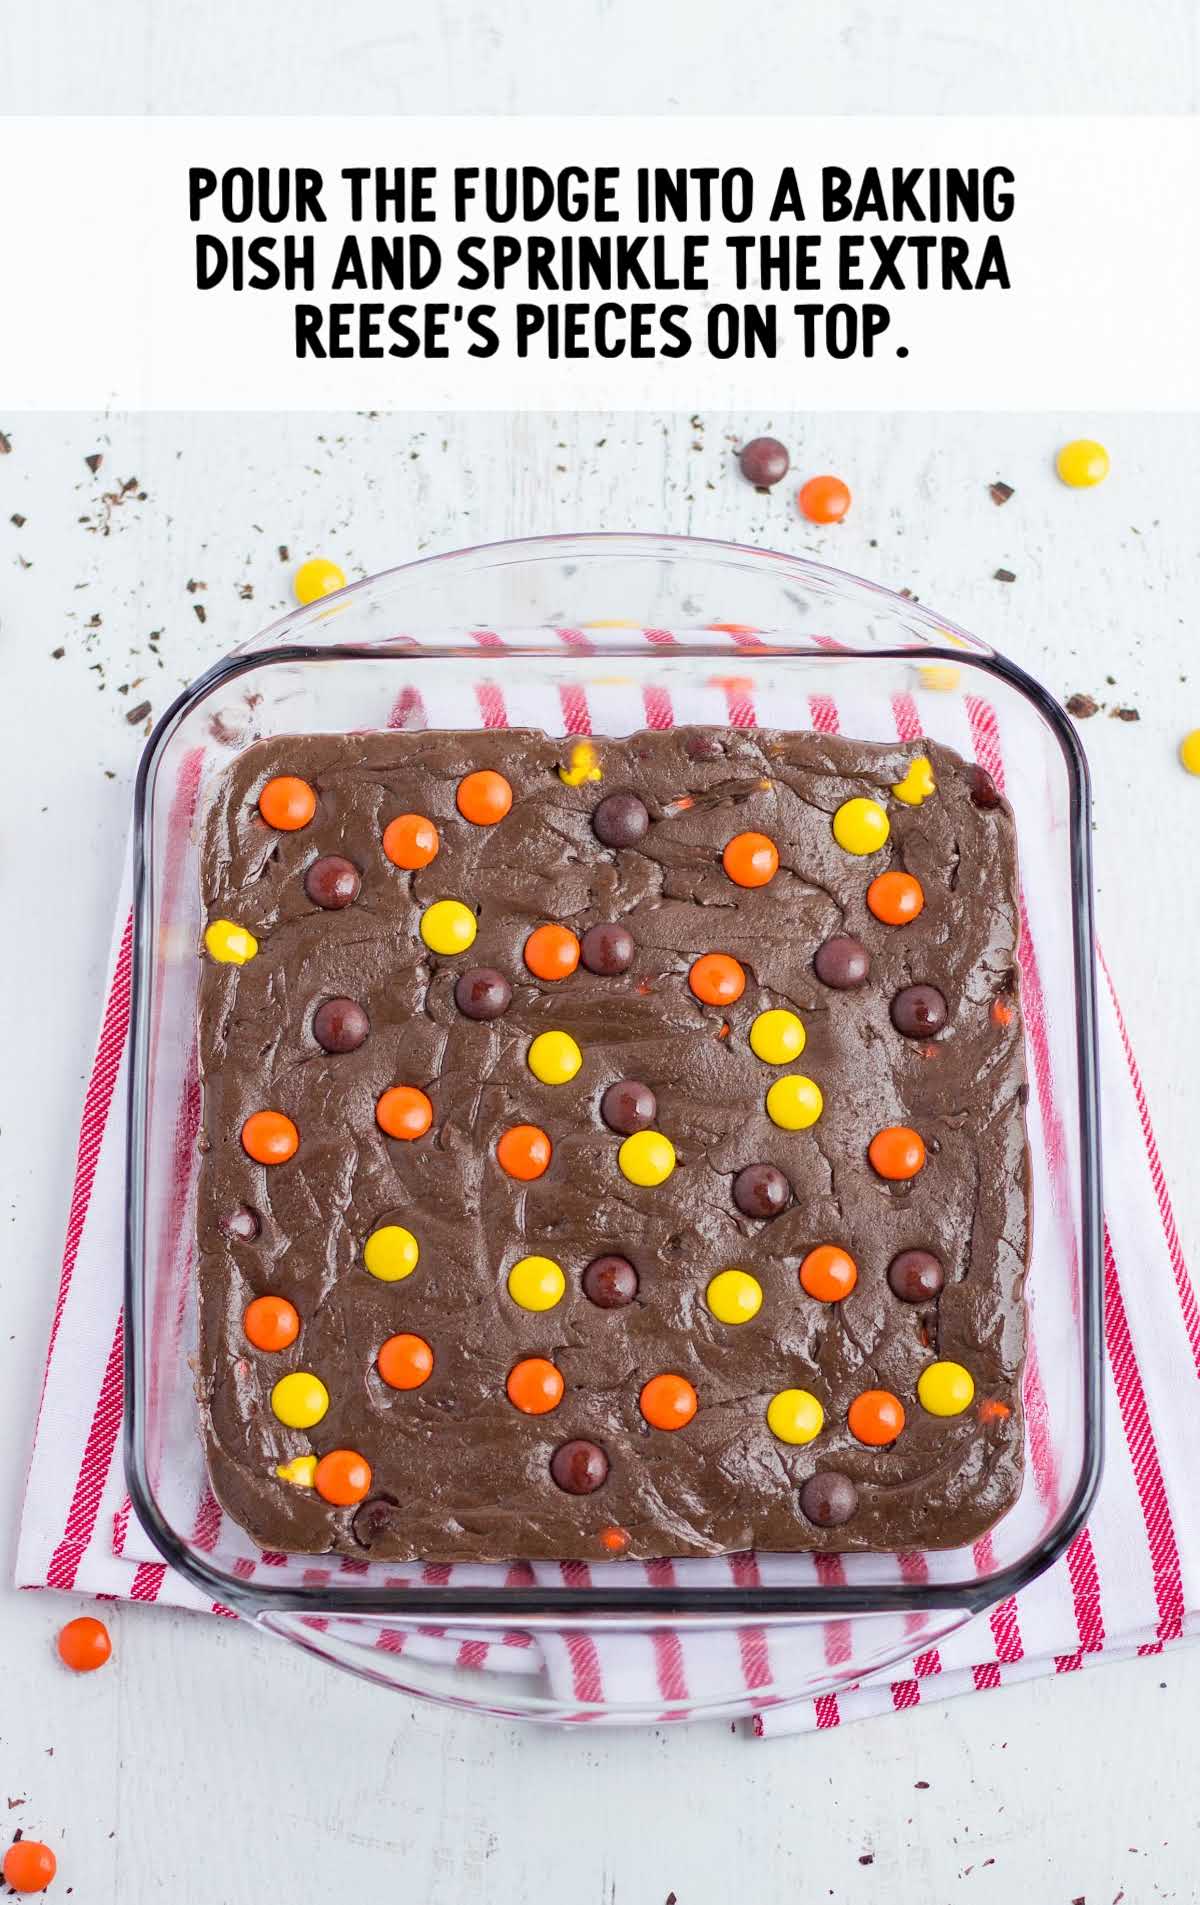 fudge poured into the baking dish and reeses's pieces sprinkled on top